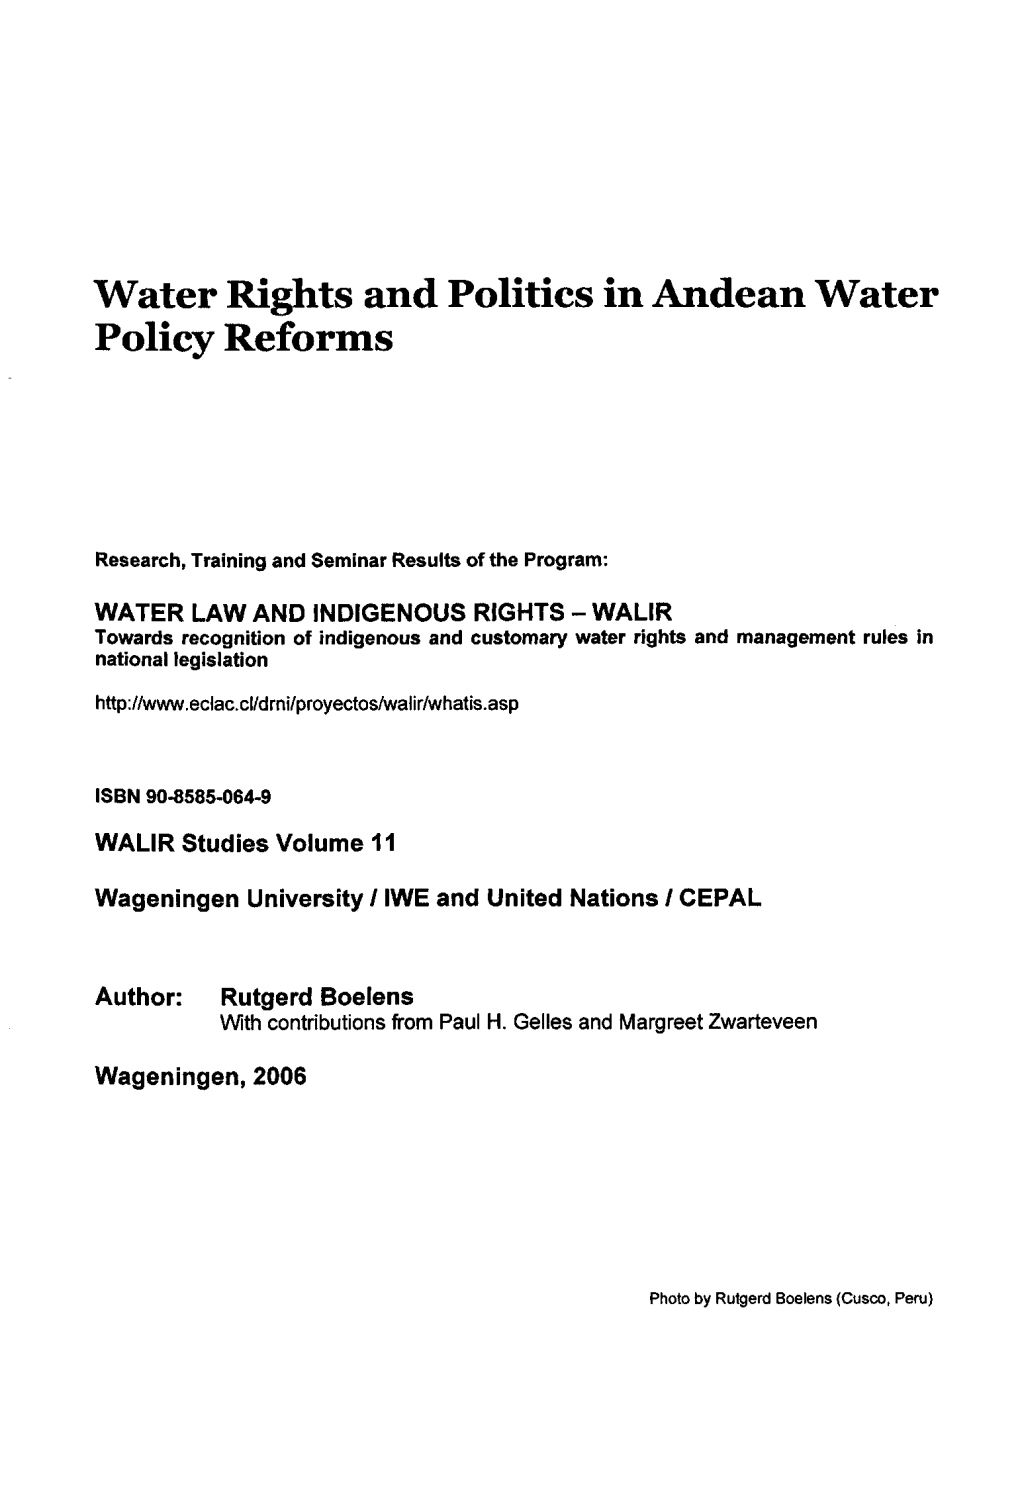 Water Rights and Politics in Andean Water Policy Reforms